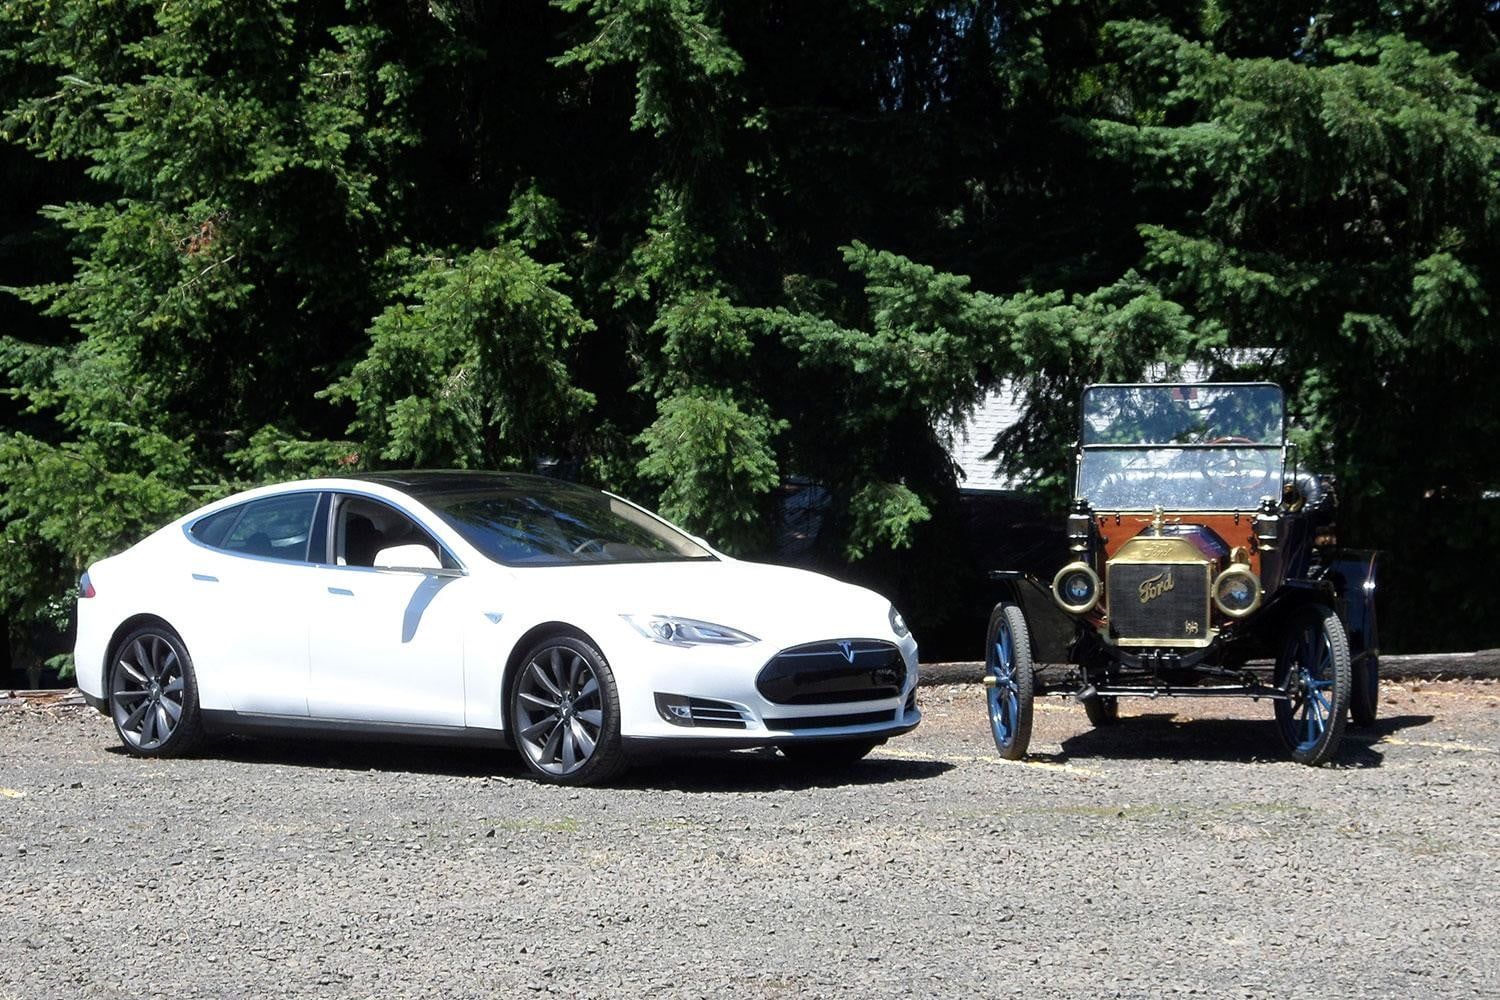 Ford Model T and Tesla Model S